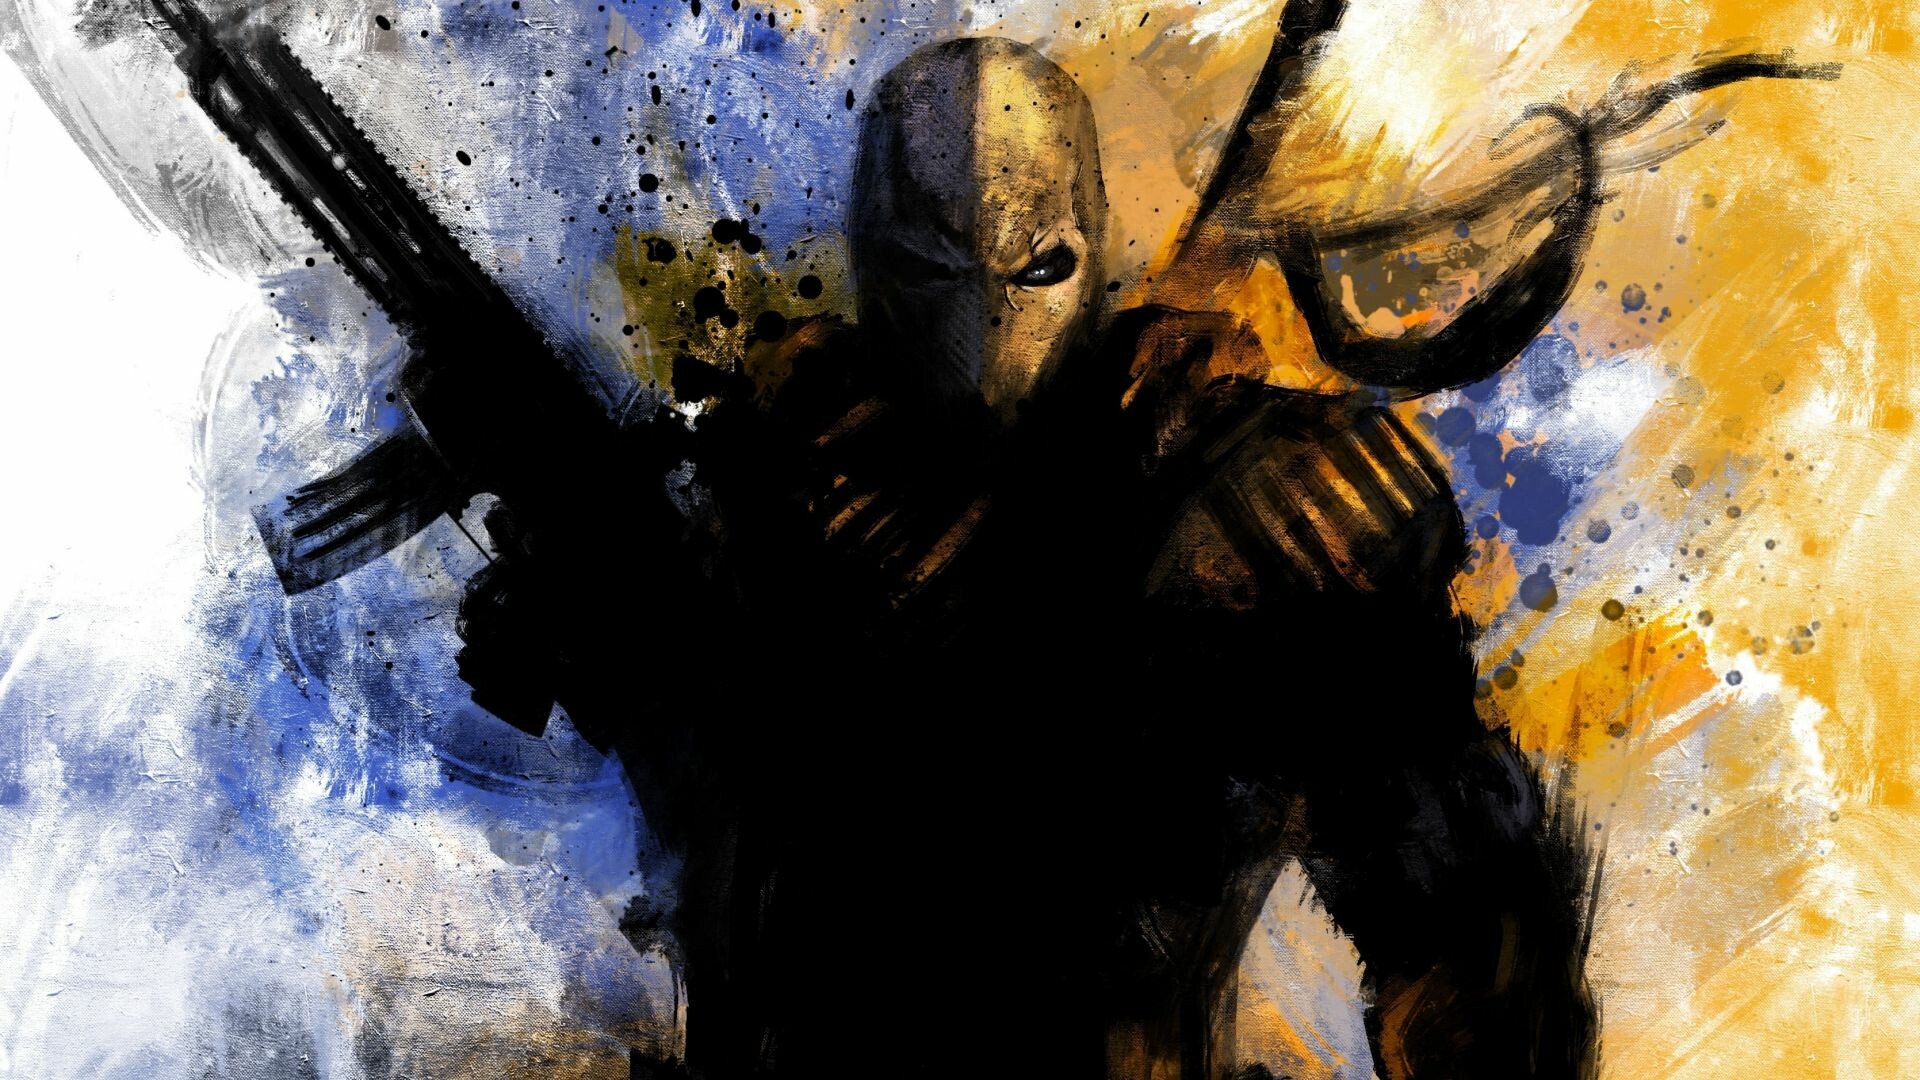 DC Villain: Deathstroke, A prominent enemy of several superhero teams. 1920x1080 Full HD Background.